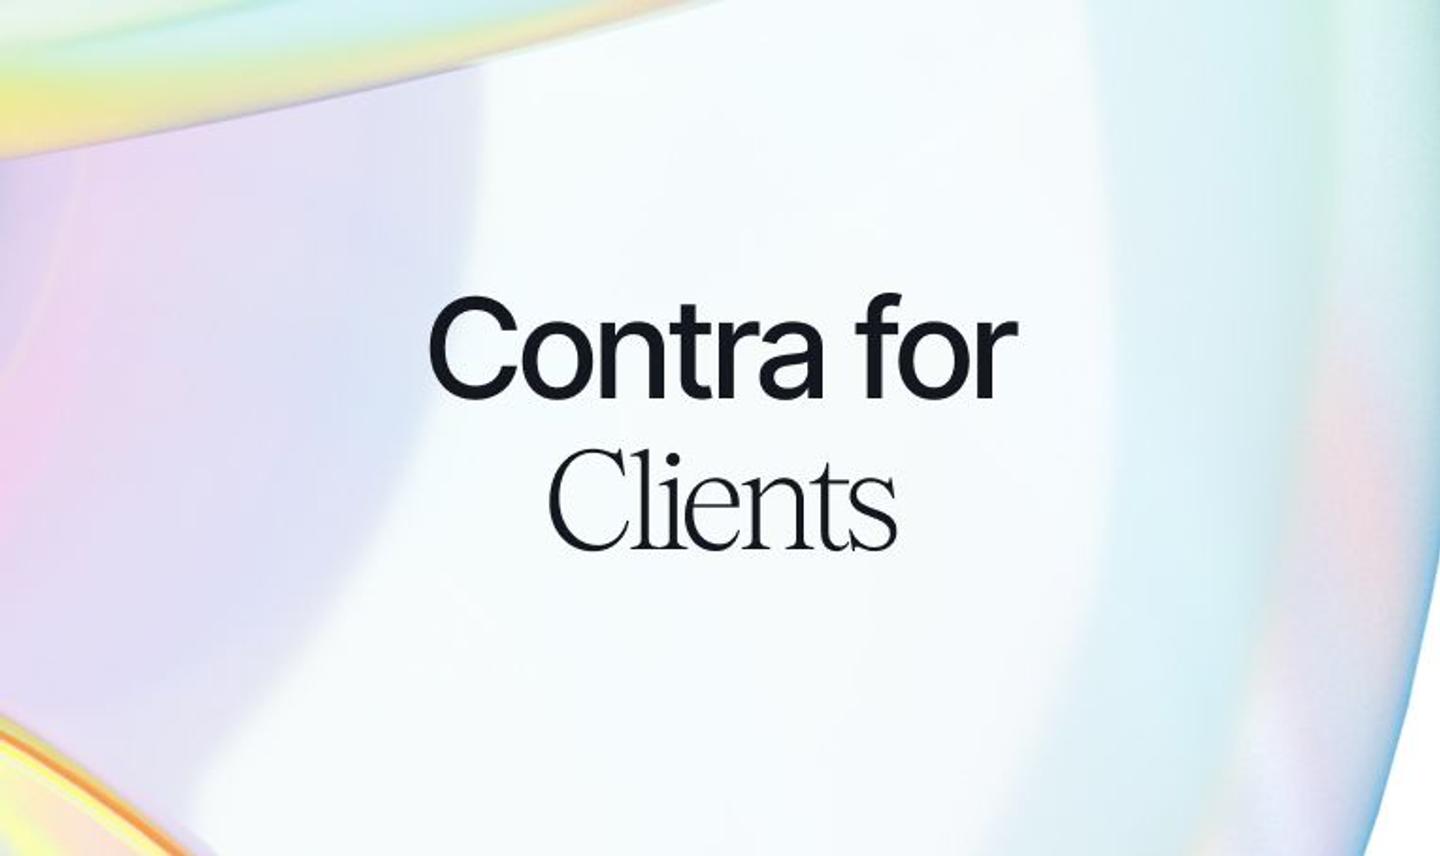 Contra - The all-in-one platform to find and manage flexible